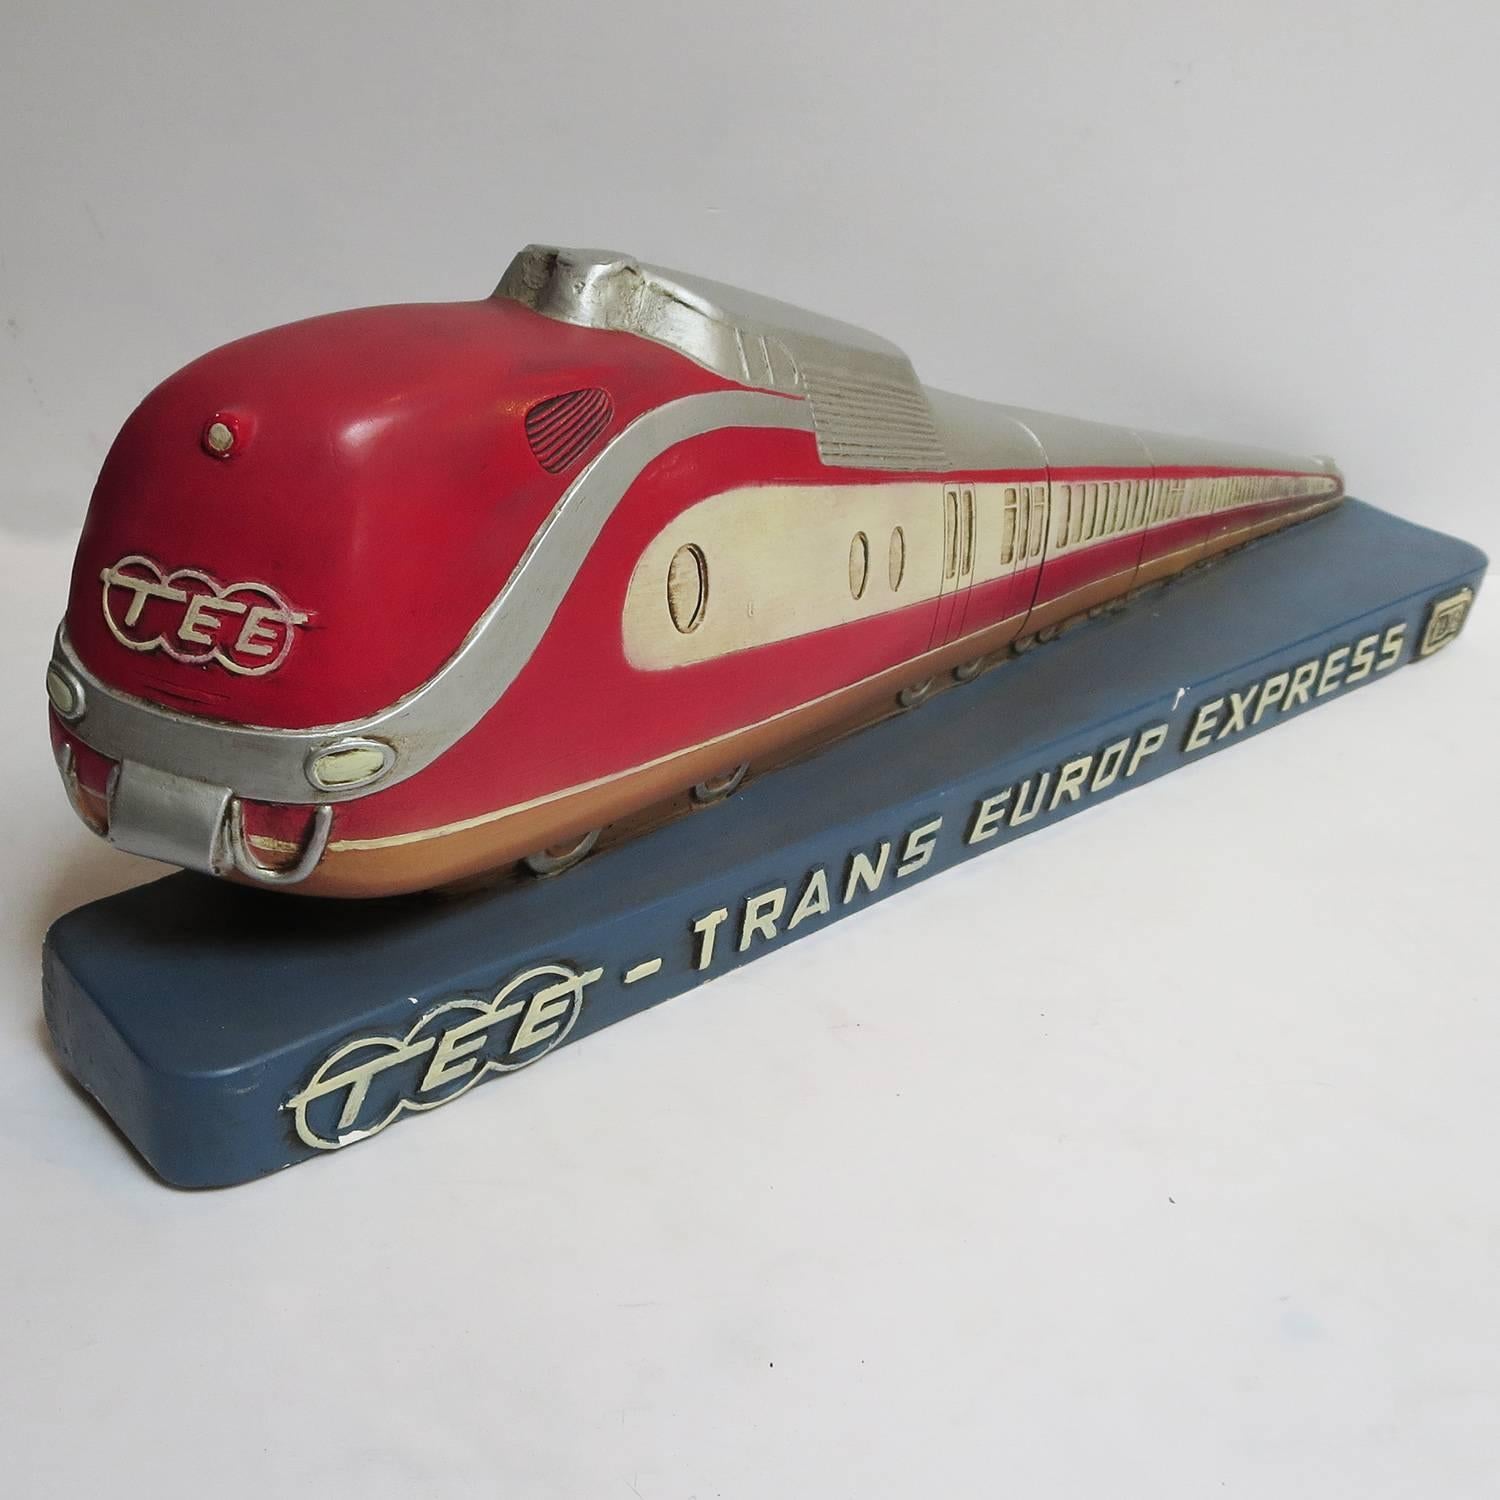 Started in Holland in 1957, the Trans Europ Express trains were a cooperative between West Germany, Italy, Switzerland, France, and the Netherlands. They were first class business trains designed to take business travellers on a one way round trip,